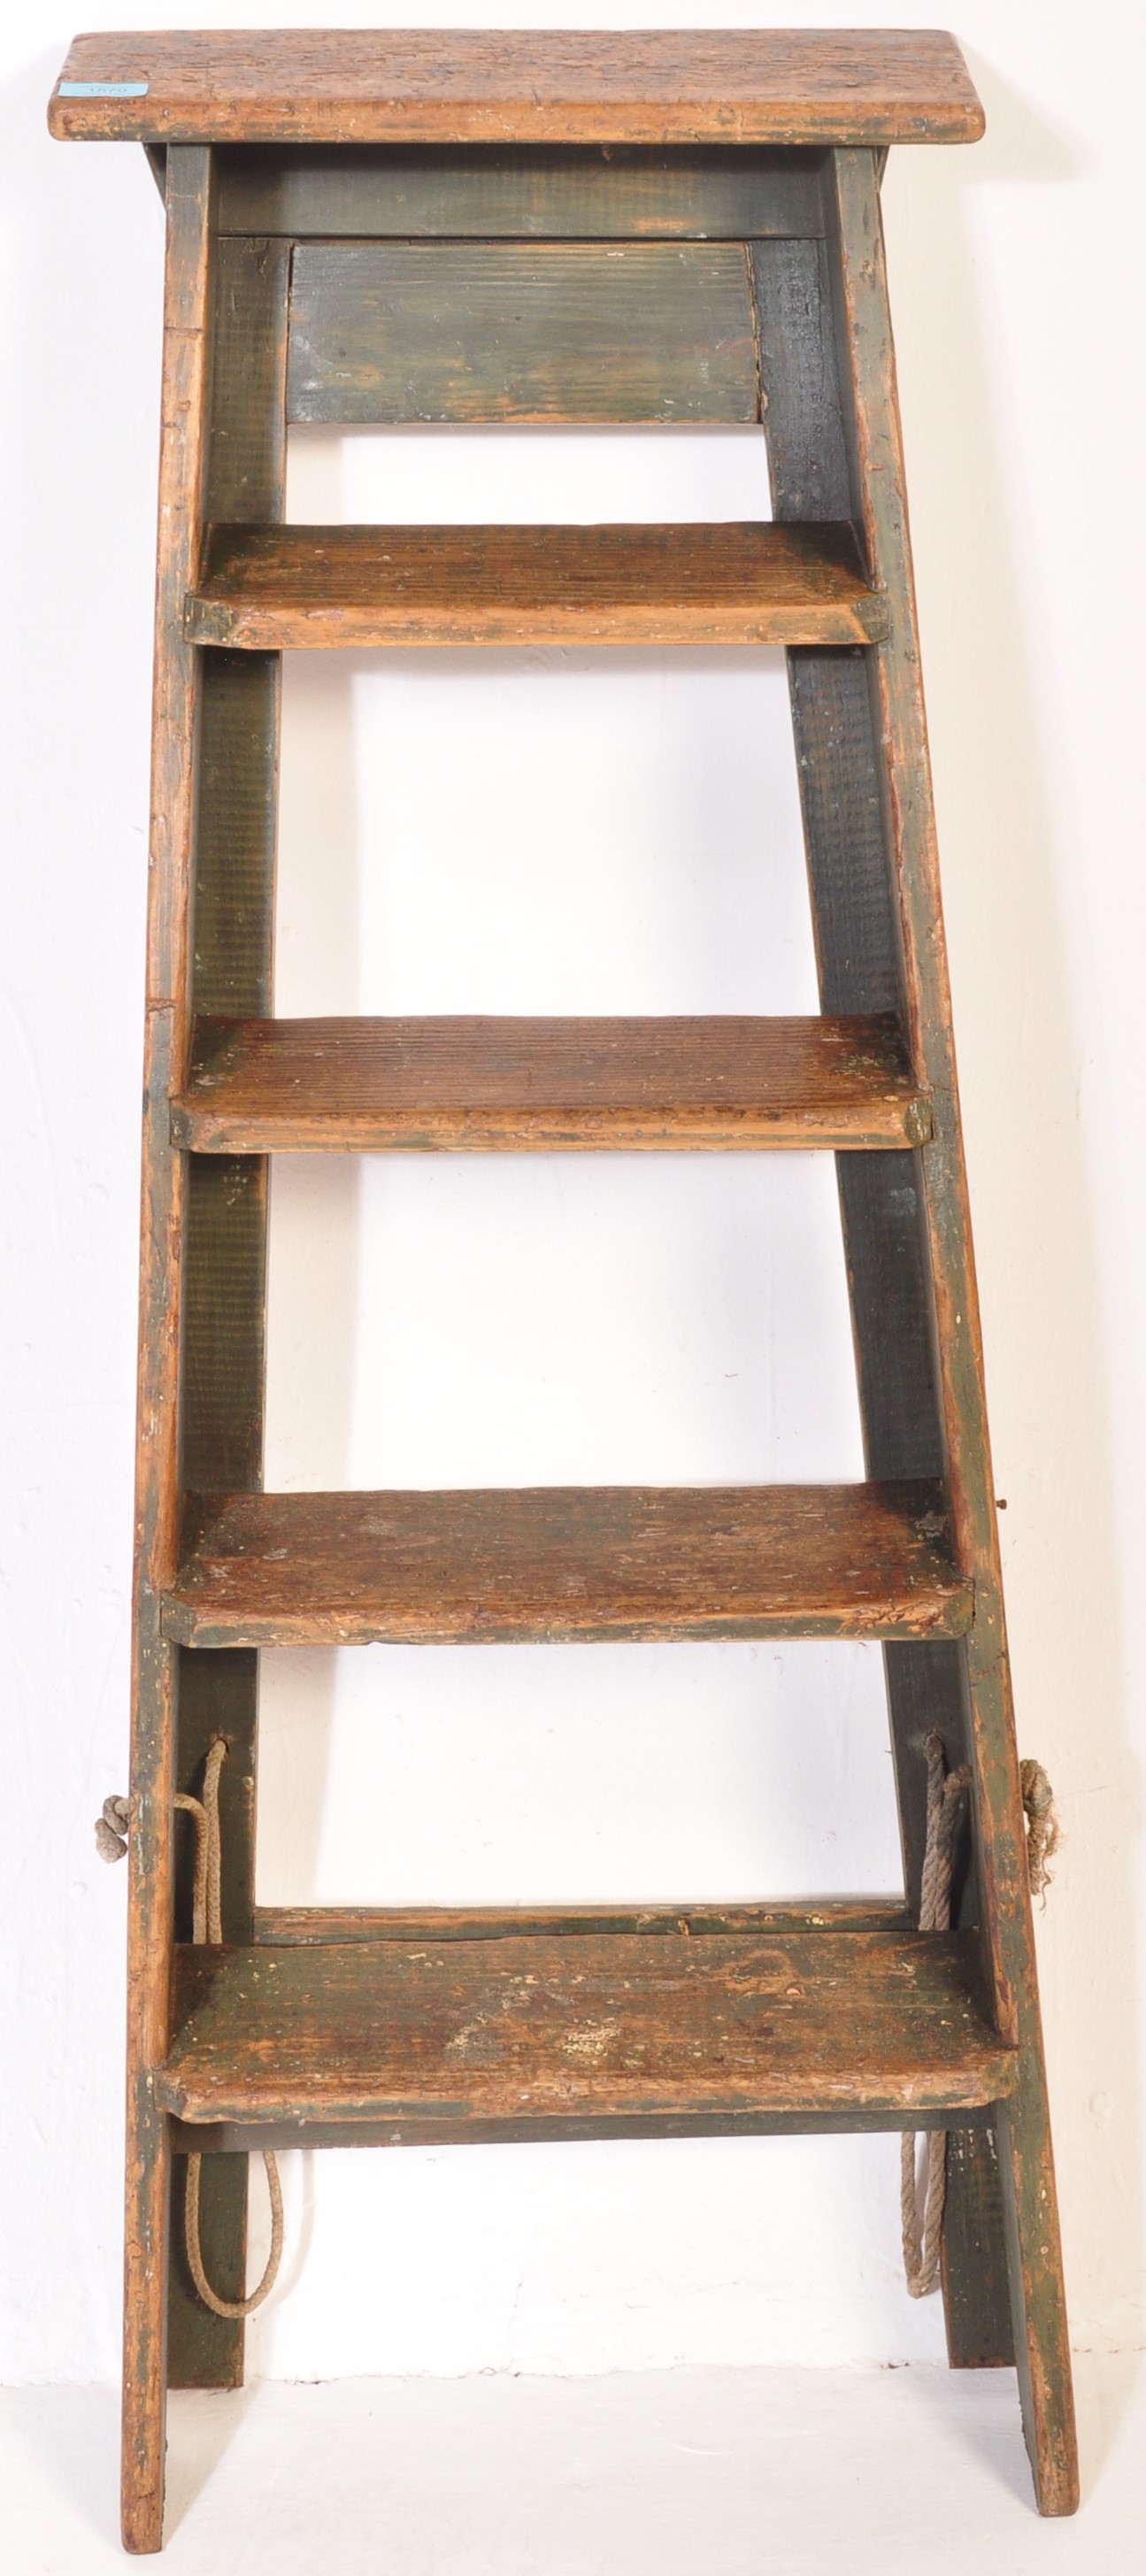 EARLY 20TH CENTURY FOLDING PINE A FRAME STEP LADDER - Image 7 of 7